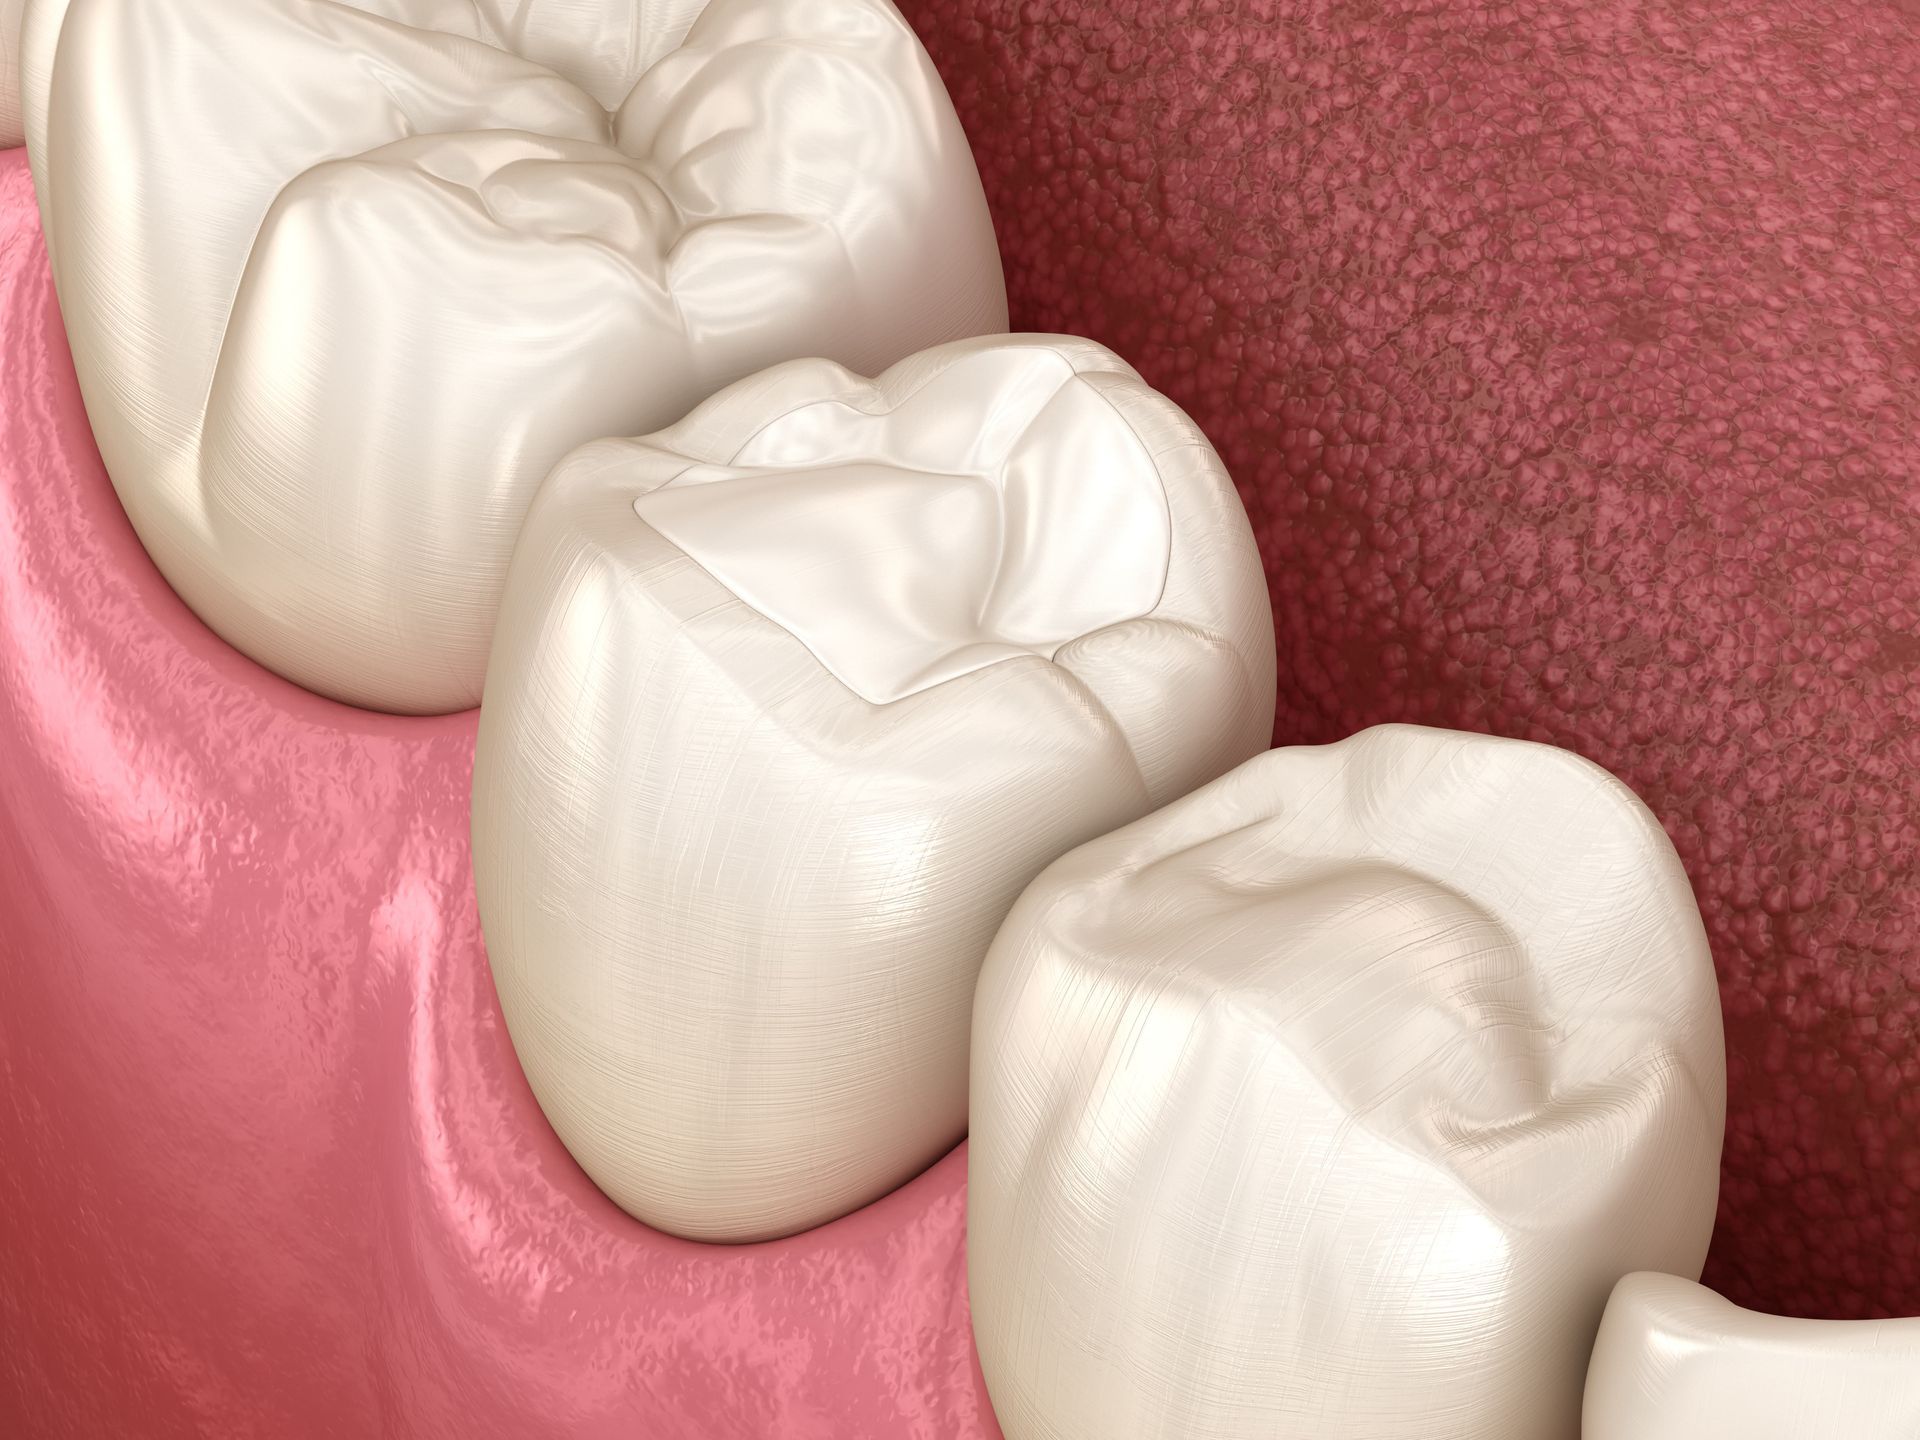 A computer generated image of a white composite filling in a tooth